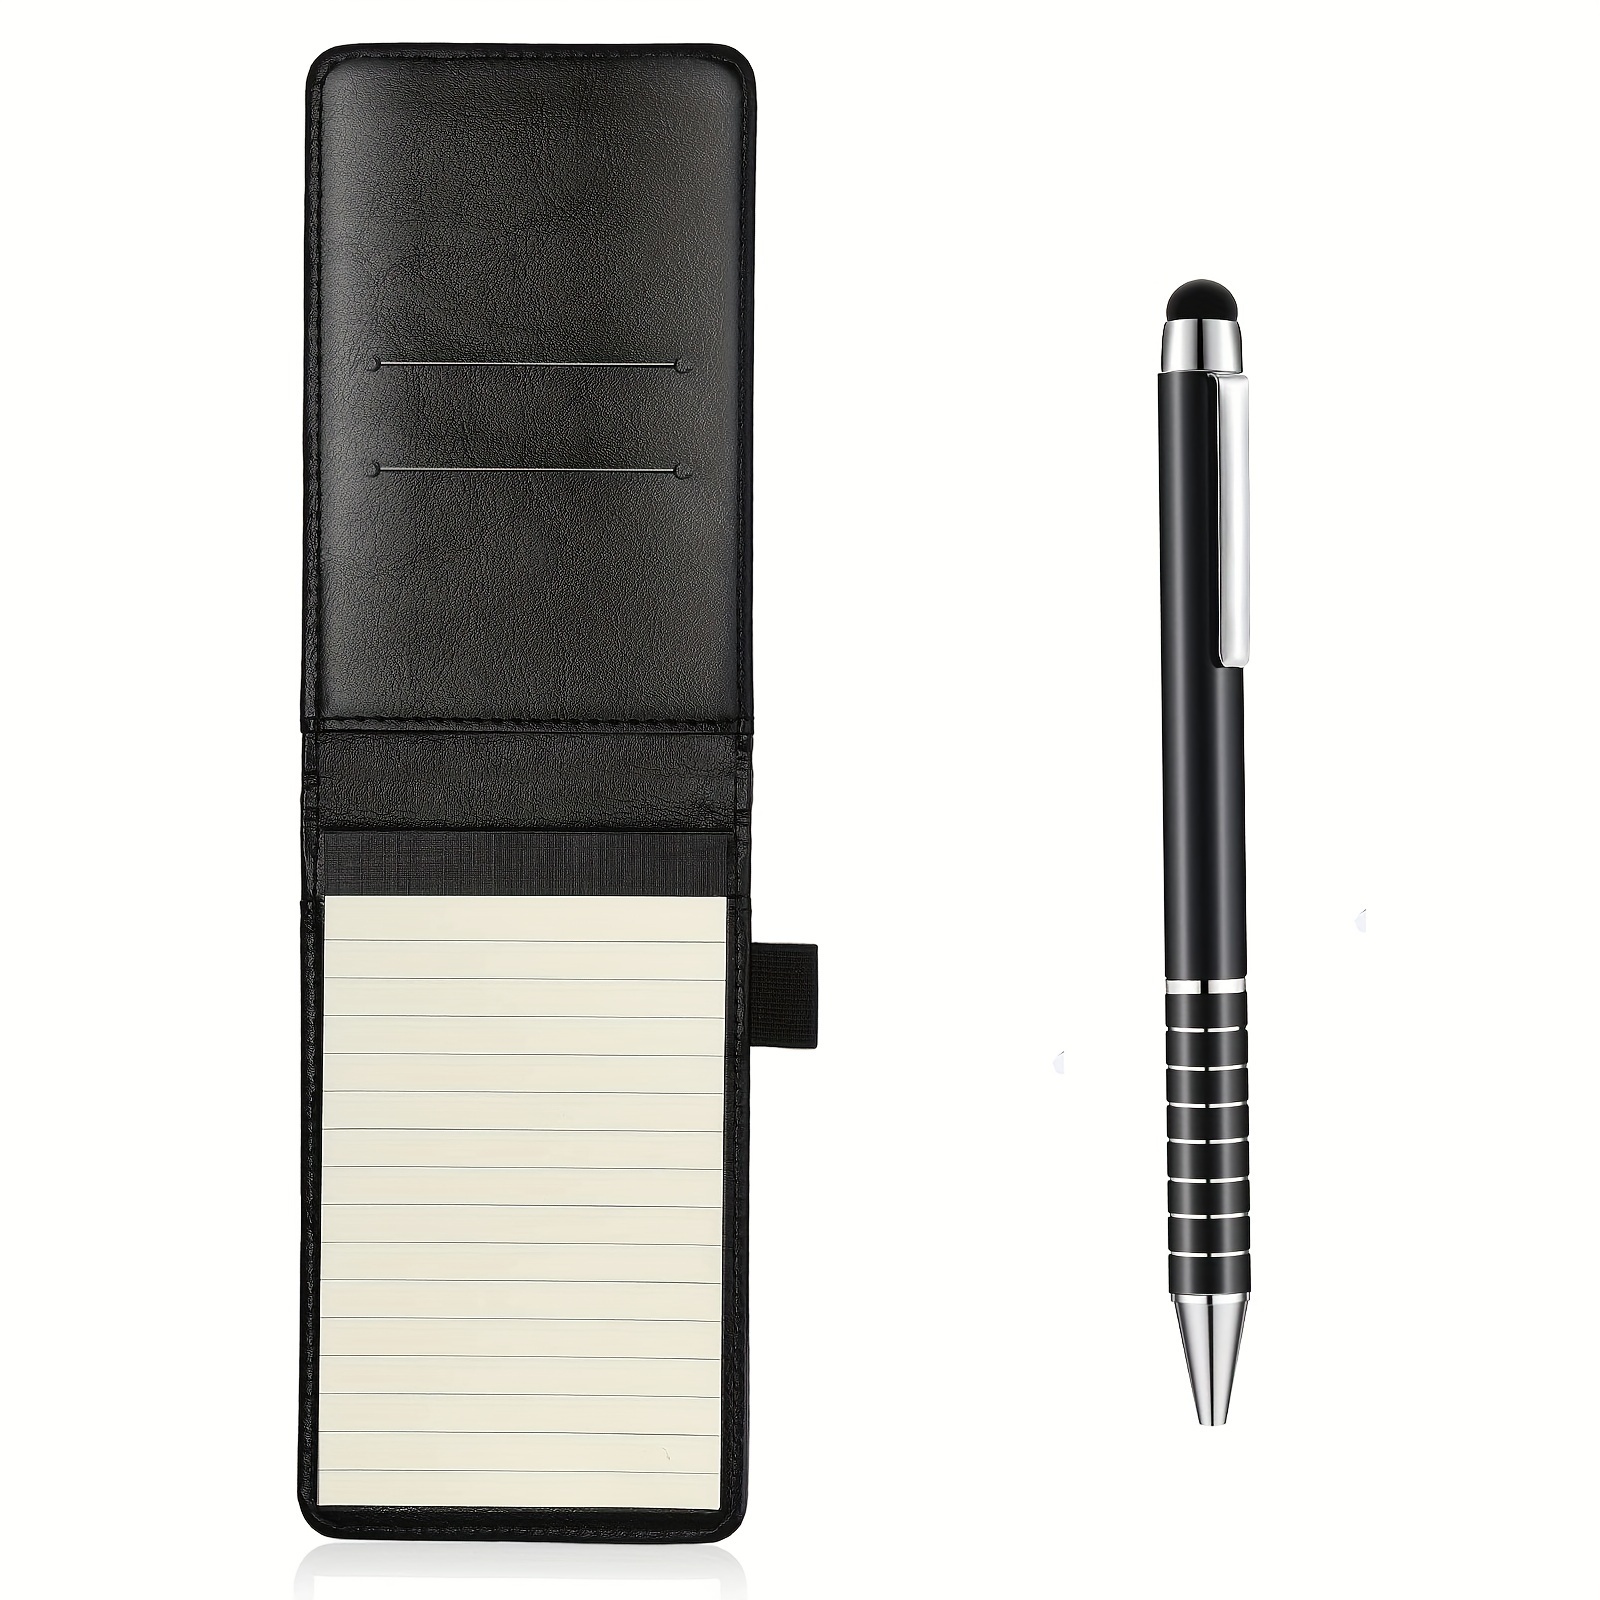 

stylish" A7 Pocket-sized Notebook And Executive Pen Set - Hard Cover, English Text, Multi-function Business Journal With Card Slots